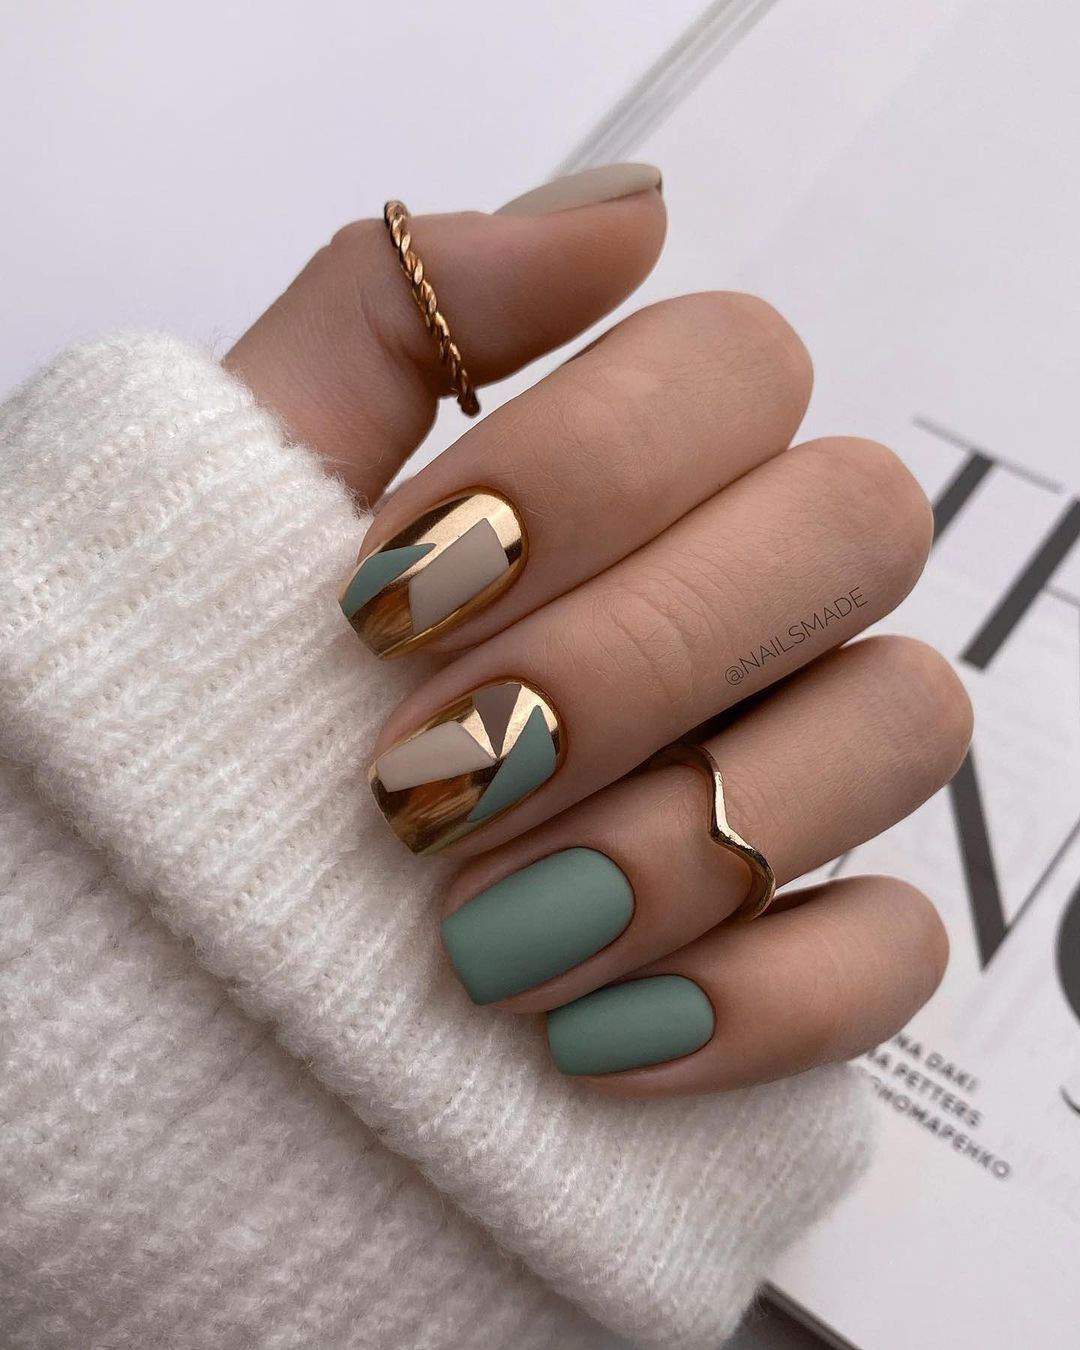 The 100+ Best Nail Designs Trends And Ideas In 2021 images 14